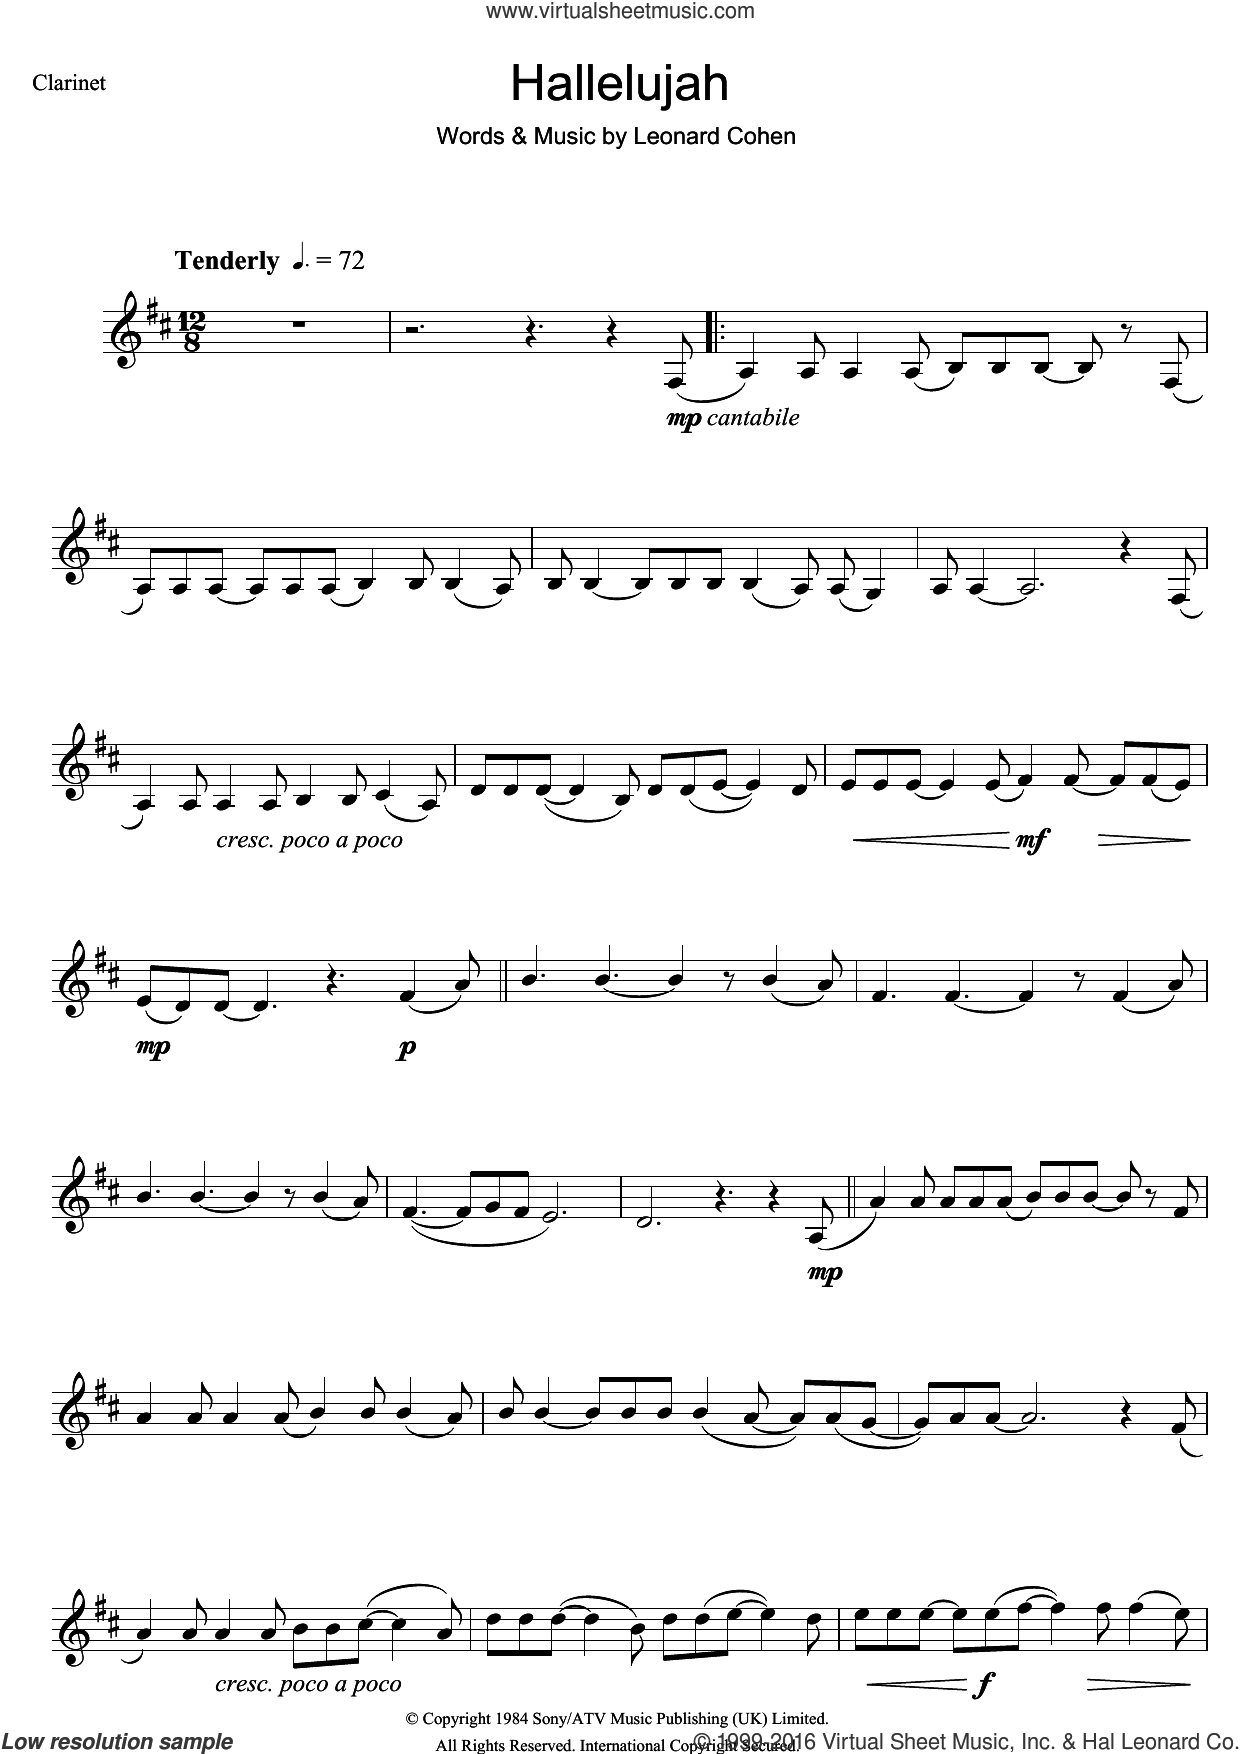 Cohen - Hallelujah Sheet Music For Clarinet Solo V2 - Free Printable Piano Sheet Music For Hallelujah By Leonard Cohen